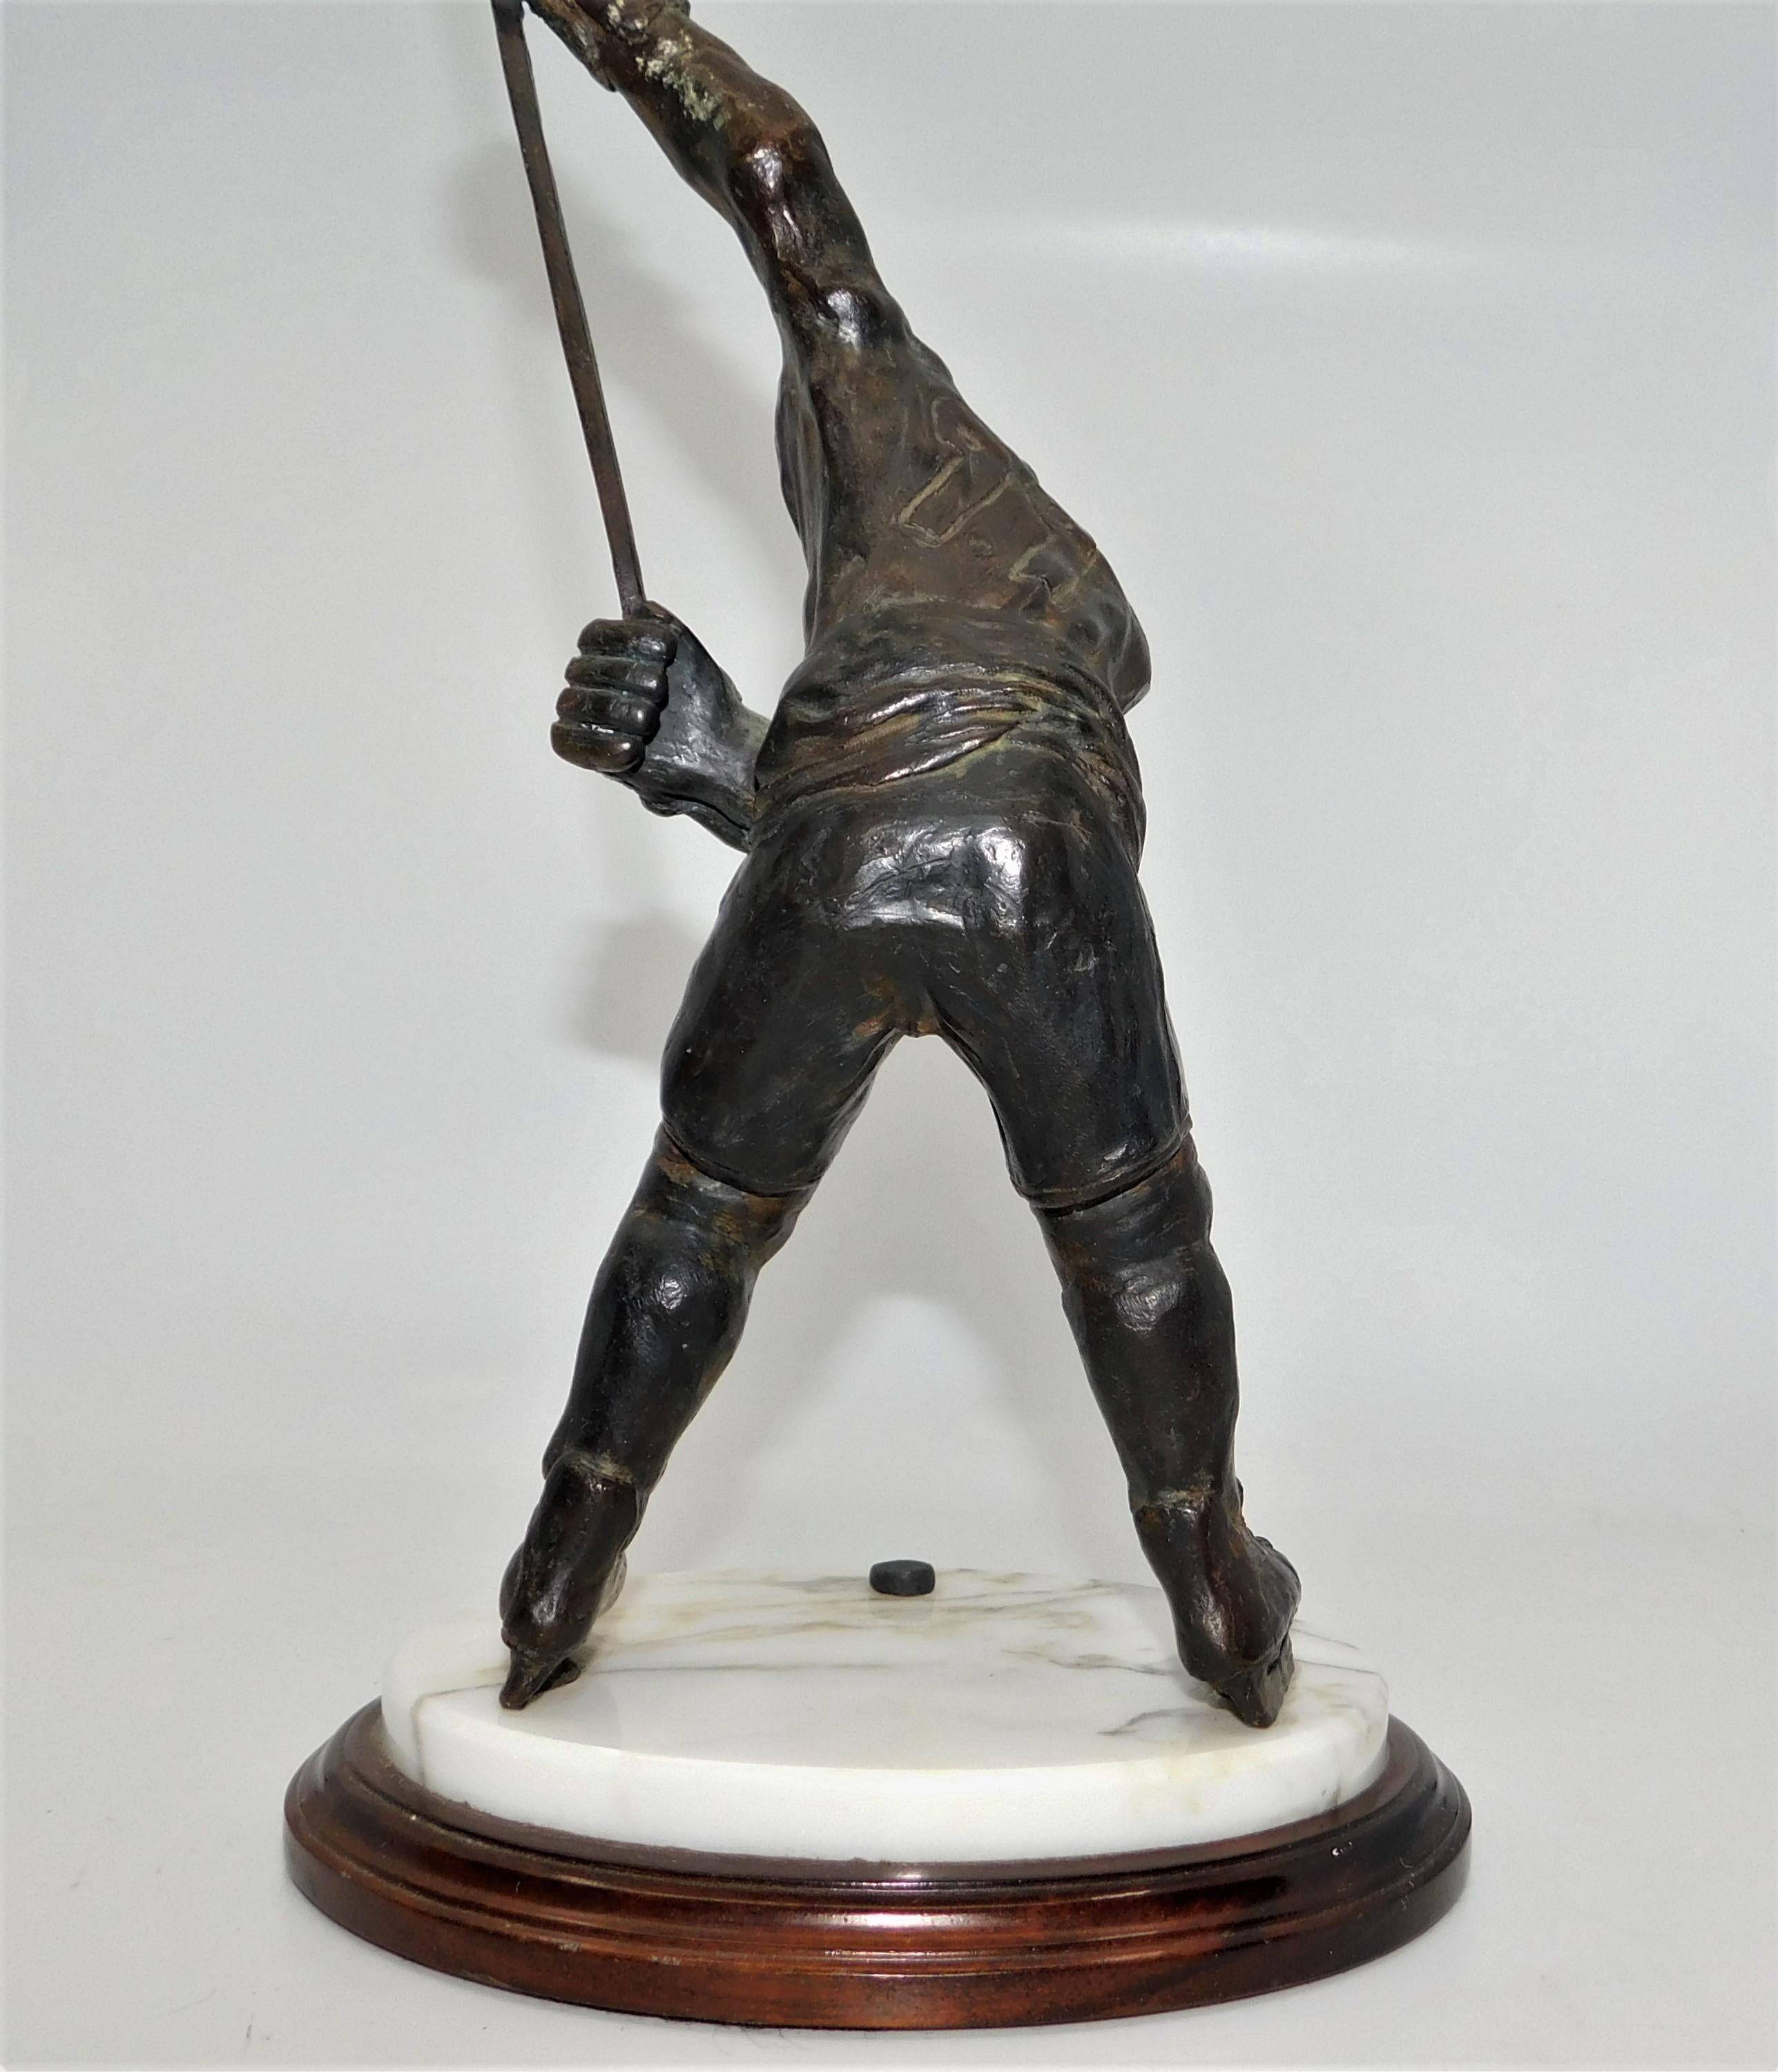 Wayne Gretzky 1985 Limited-Edition Hand Sculpted Bronze Statue #20/200 1